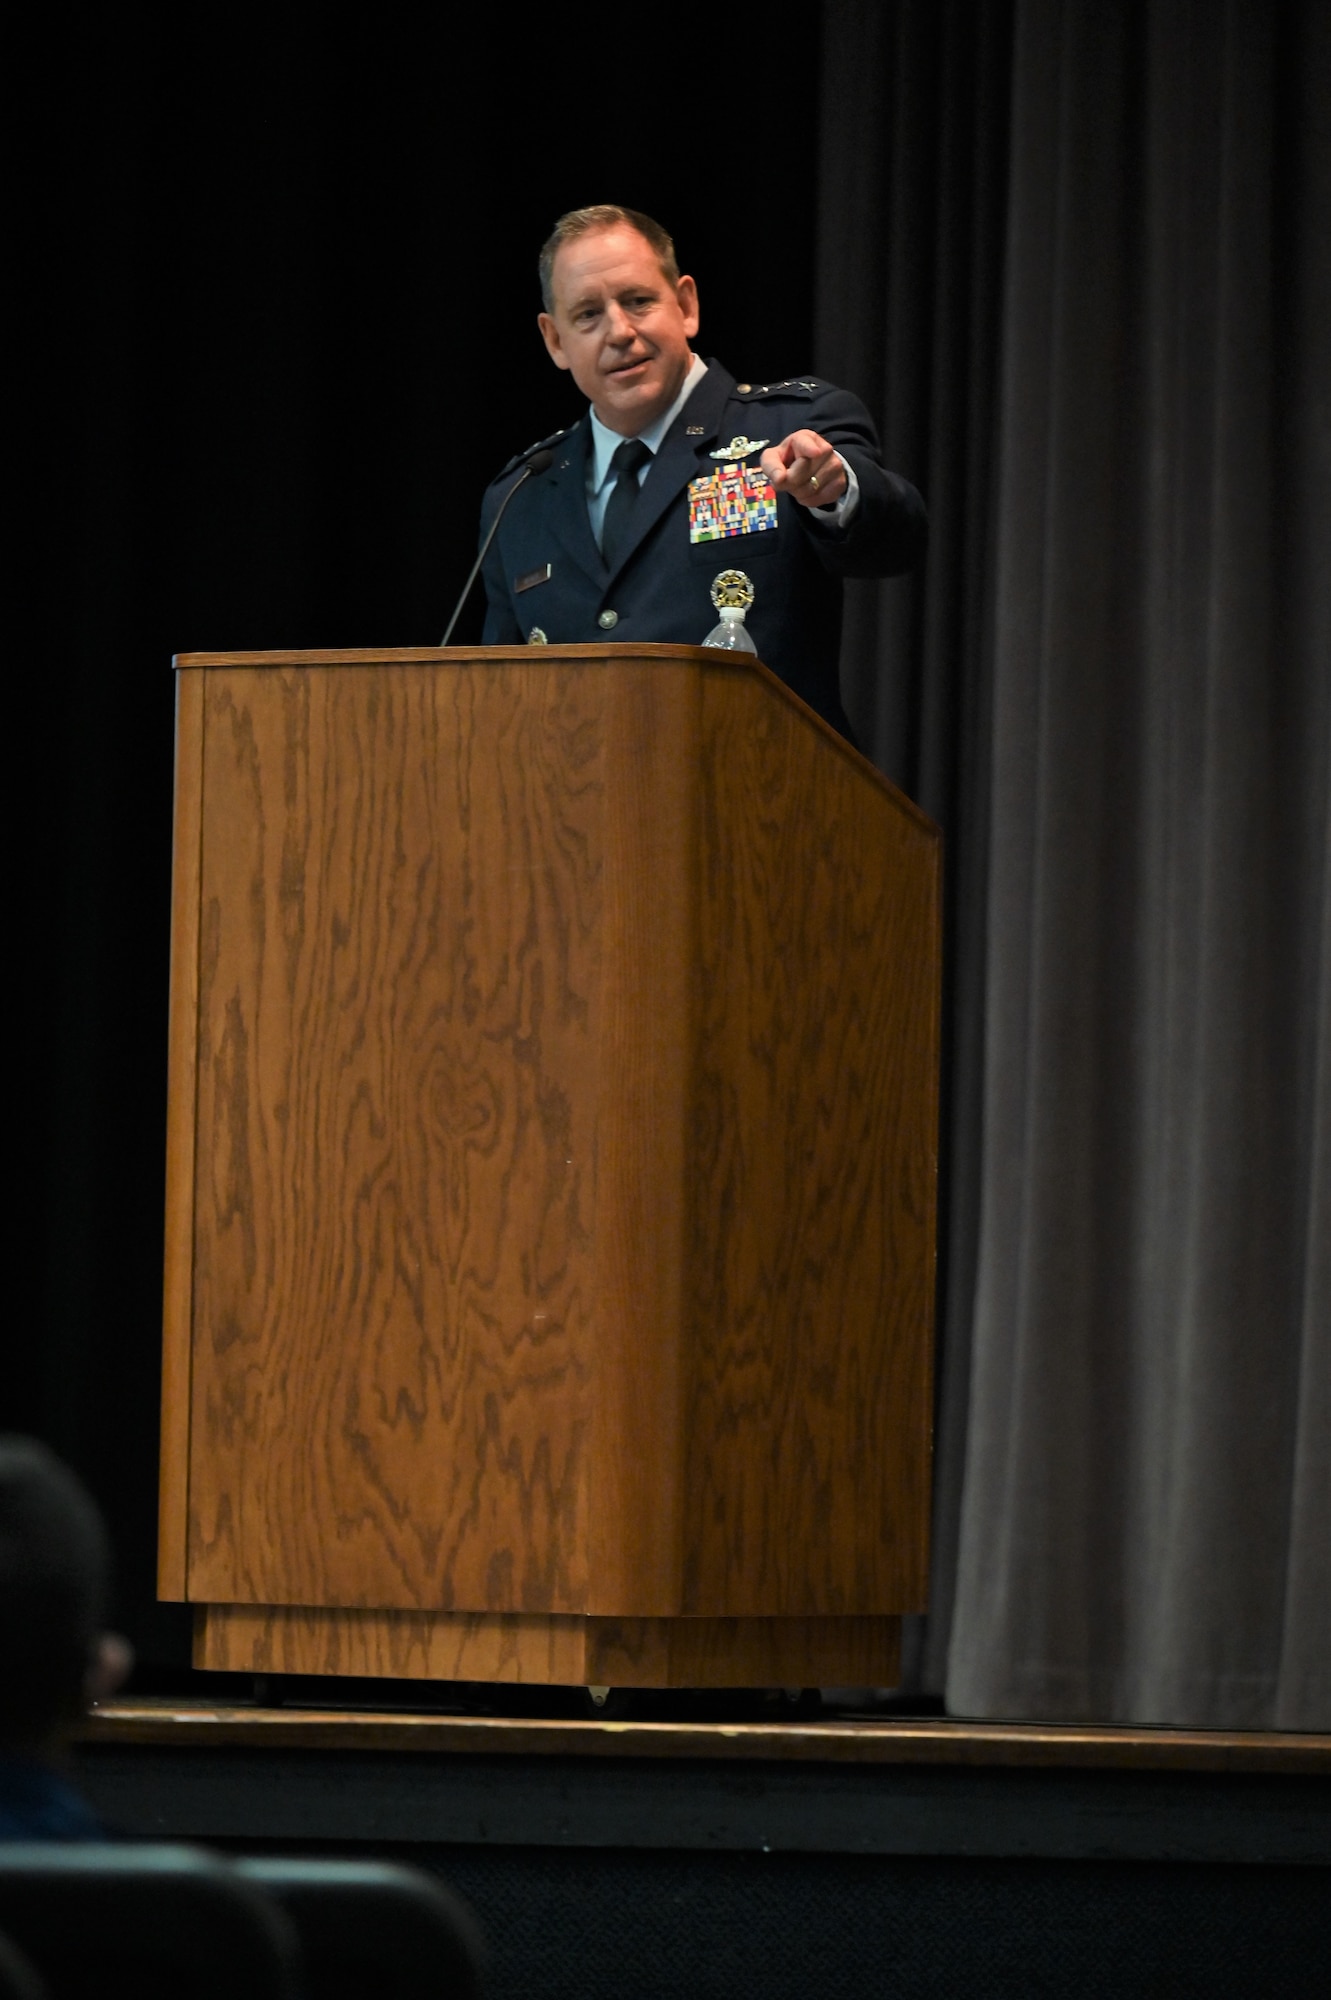 U.S. Air Force Lt. Gen. James Hecker, Air University Commander and President, giving his speech during the graduation ceremony of Specialized Undergraduate Pilot Training Class 21-15, Sept. 10, 2021, on Columbus Air Force Base, Miss. Graduates of SUPT have to complete a demanding 52-week course, comprised of academics, physiological training, and flight training in the T-6A Texan II, T-1A Jayhawk, and T-38C Talon. (U.S. Air Force photo by Senior Airman Jake Jacobsen)